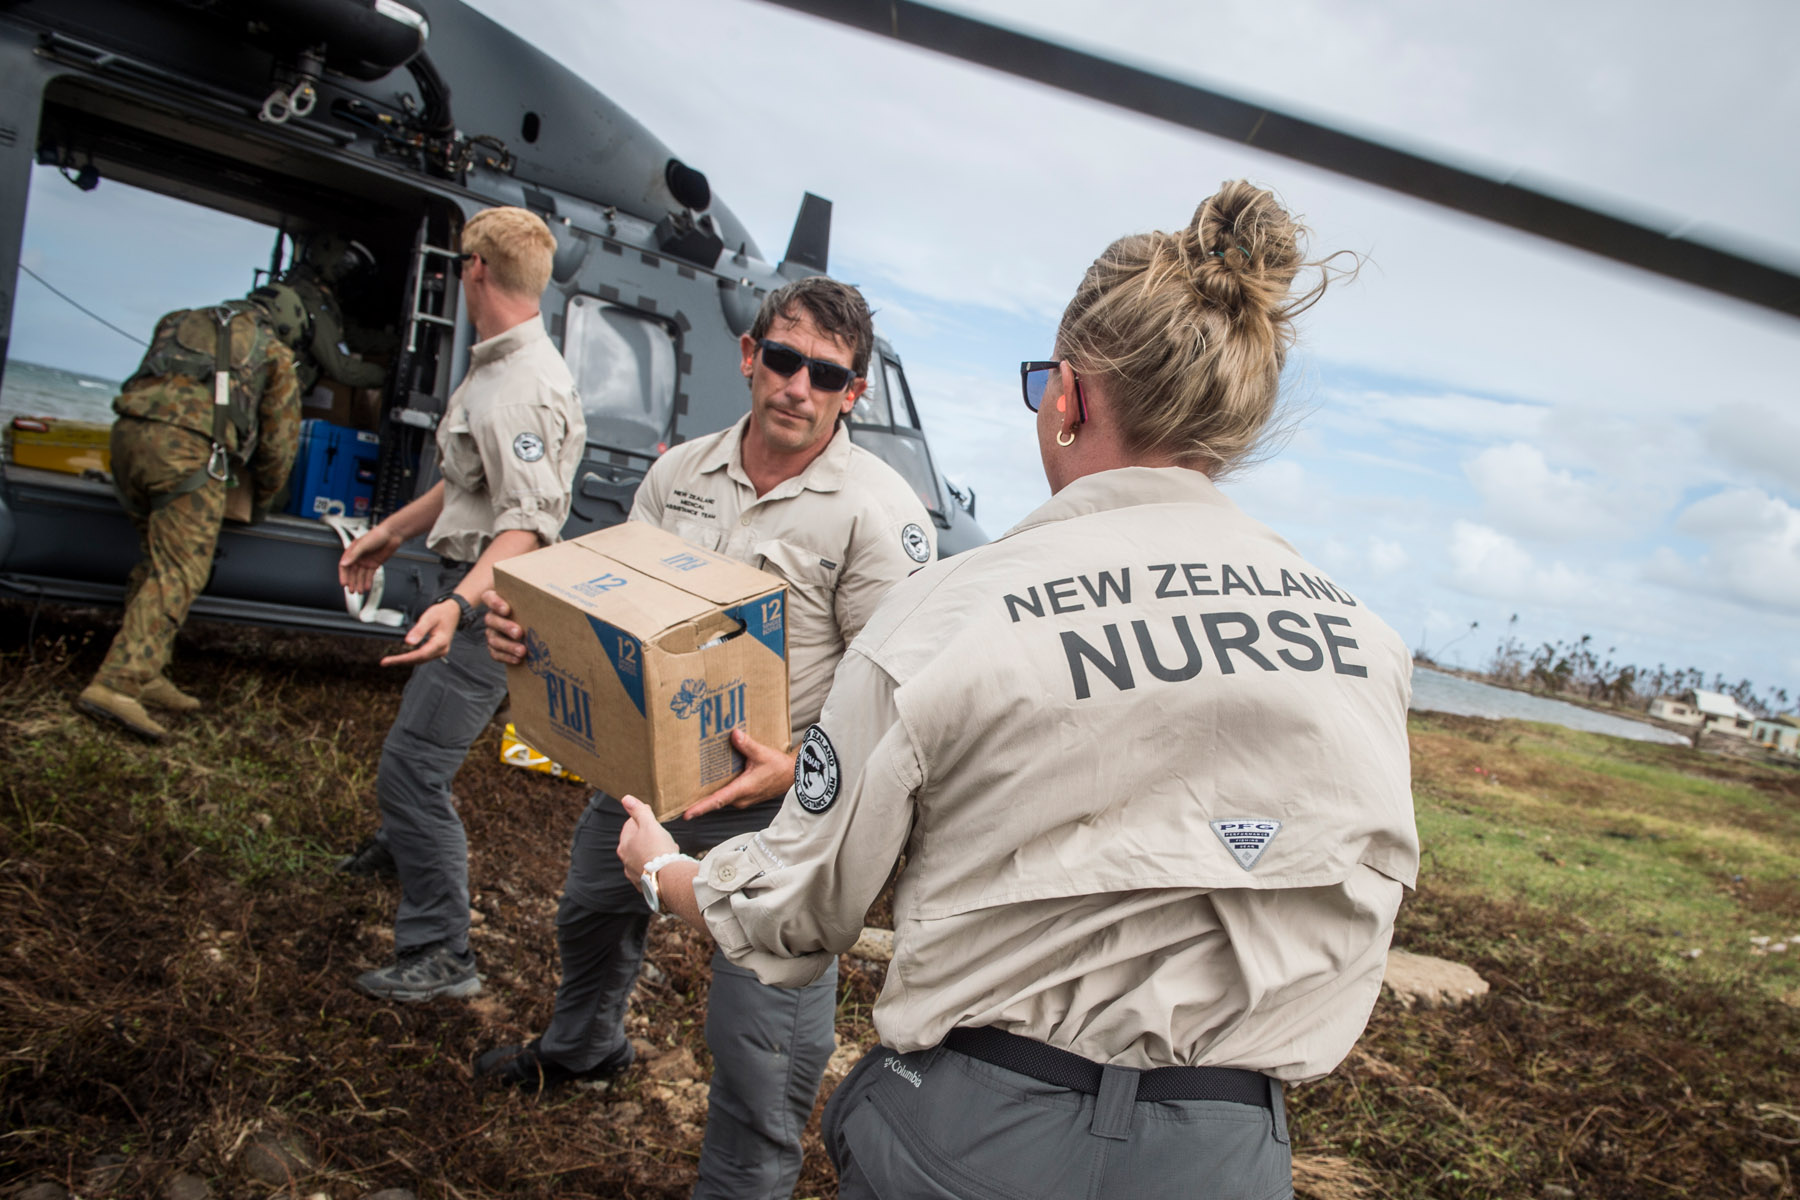 Members of NZ Medical Assistance Team help unload aid and equipment in Nasau, Koro Island following Tropical Cyclone Winston (image: NZDF / NZ MFAT)